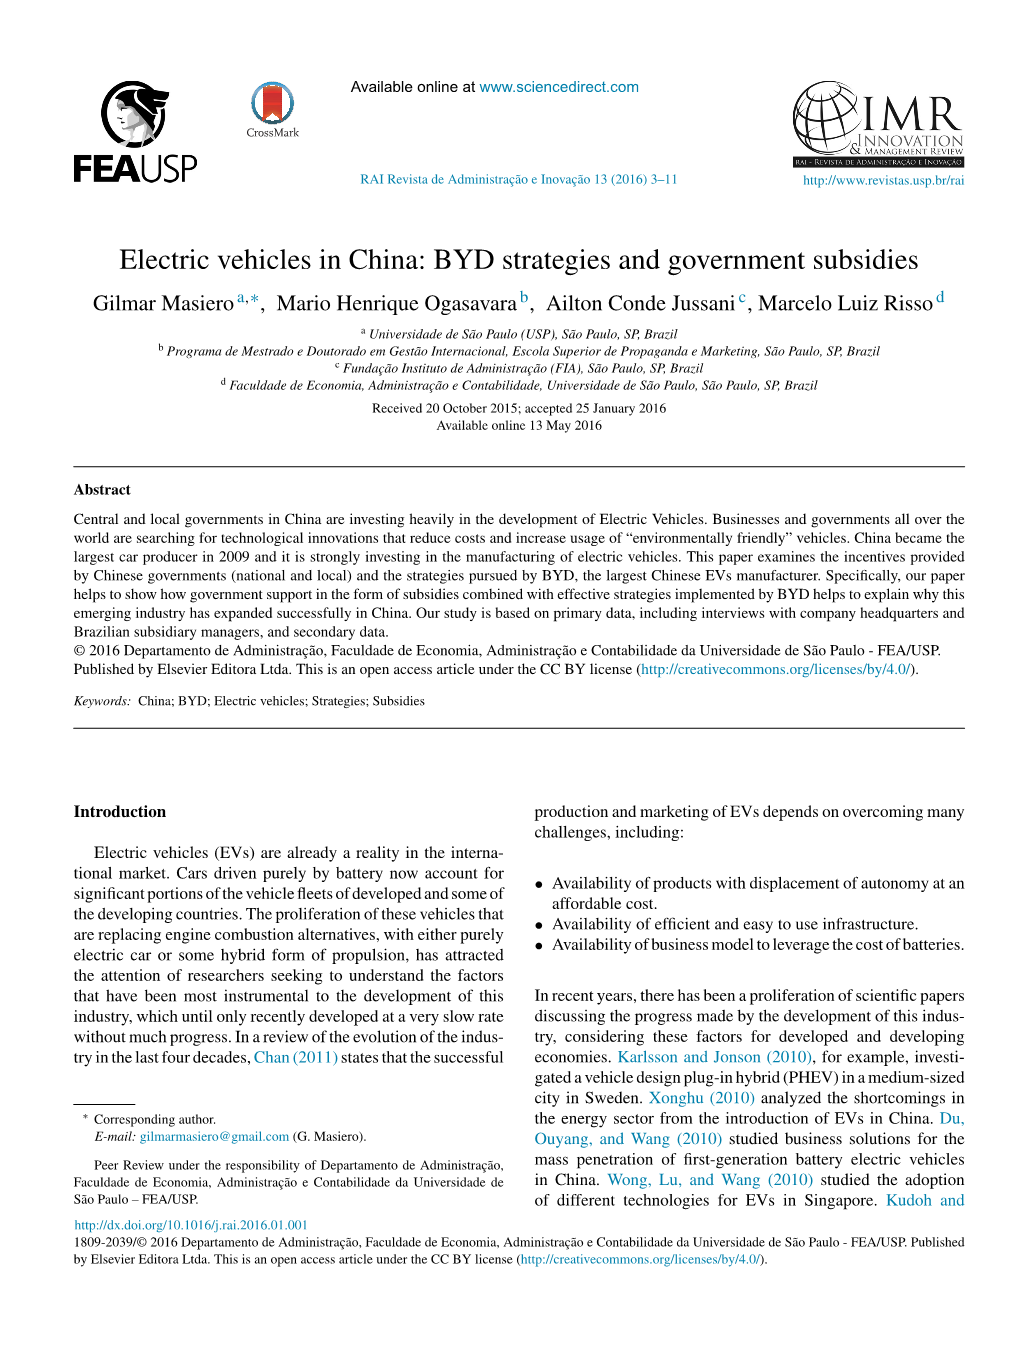 Electric Vehicles in China: BYD Strategies and Government Subsidies